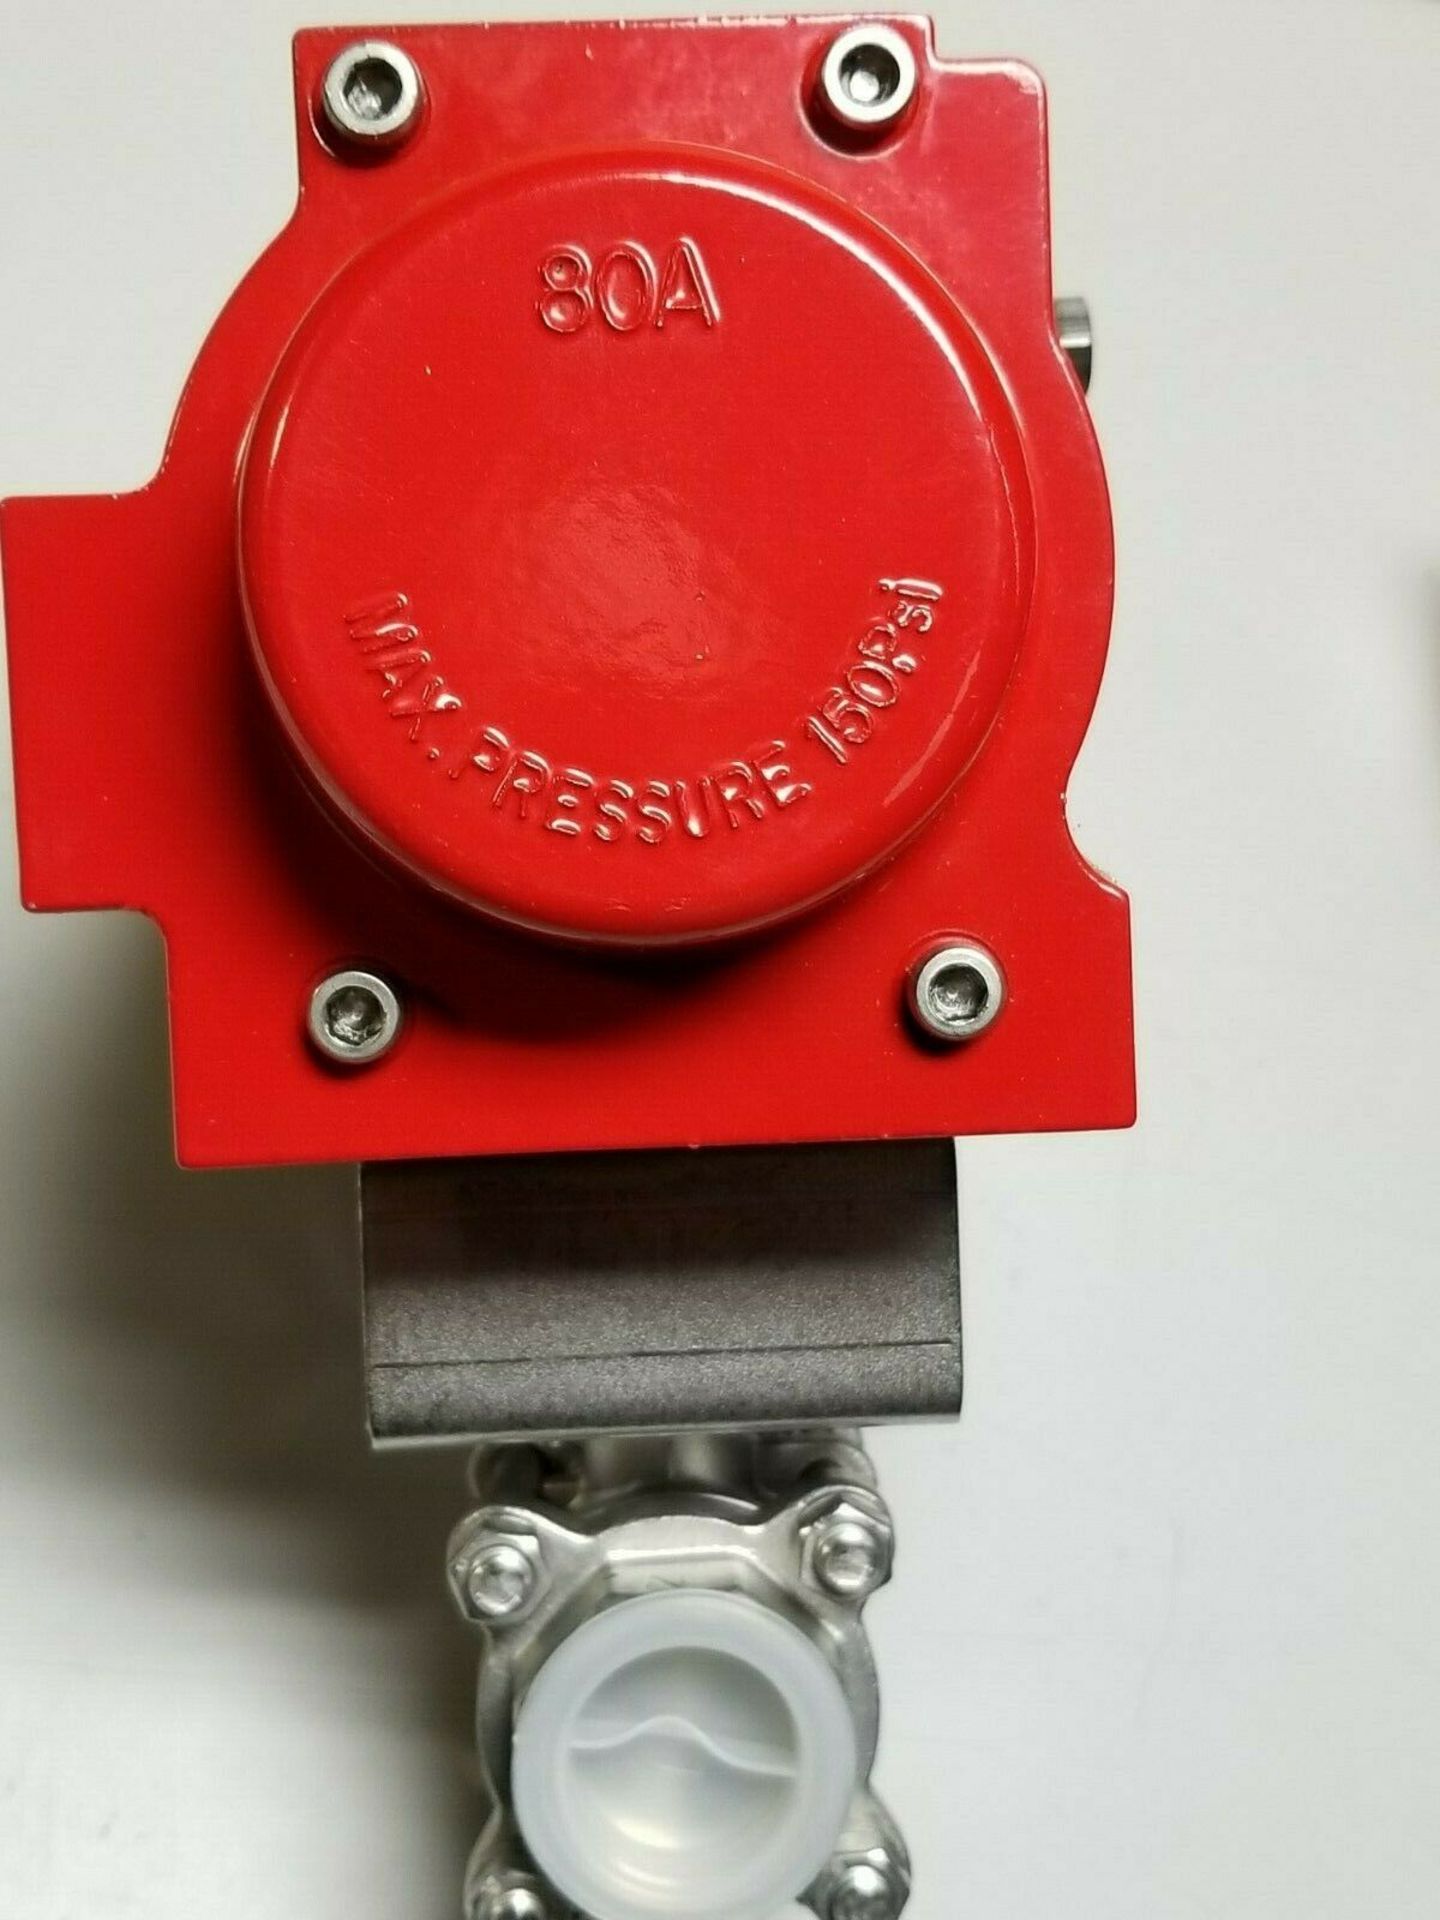 NEW AT 1" 316 STAINLESS STEEL BALL VALVE WITH TRIAC ACTUATOR - Image 10 of 10